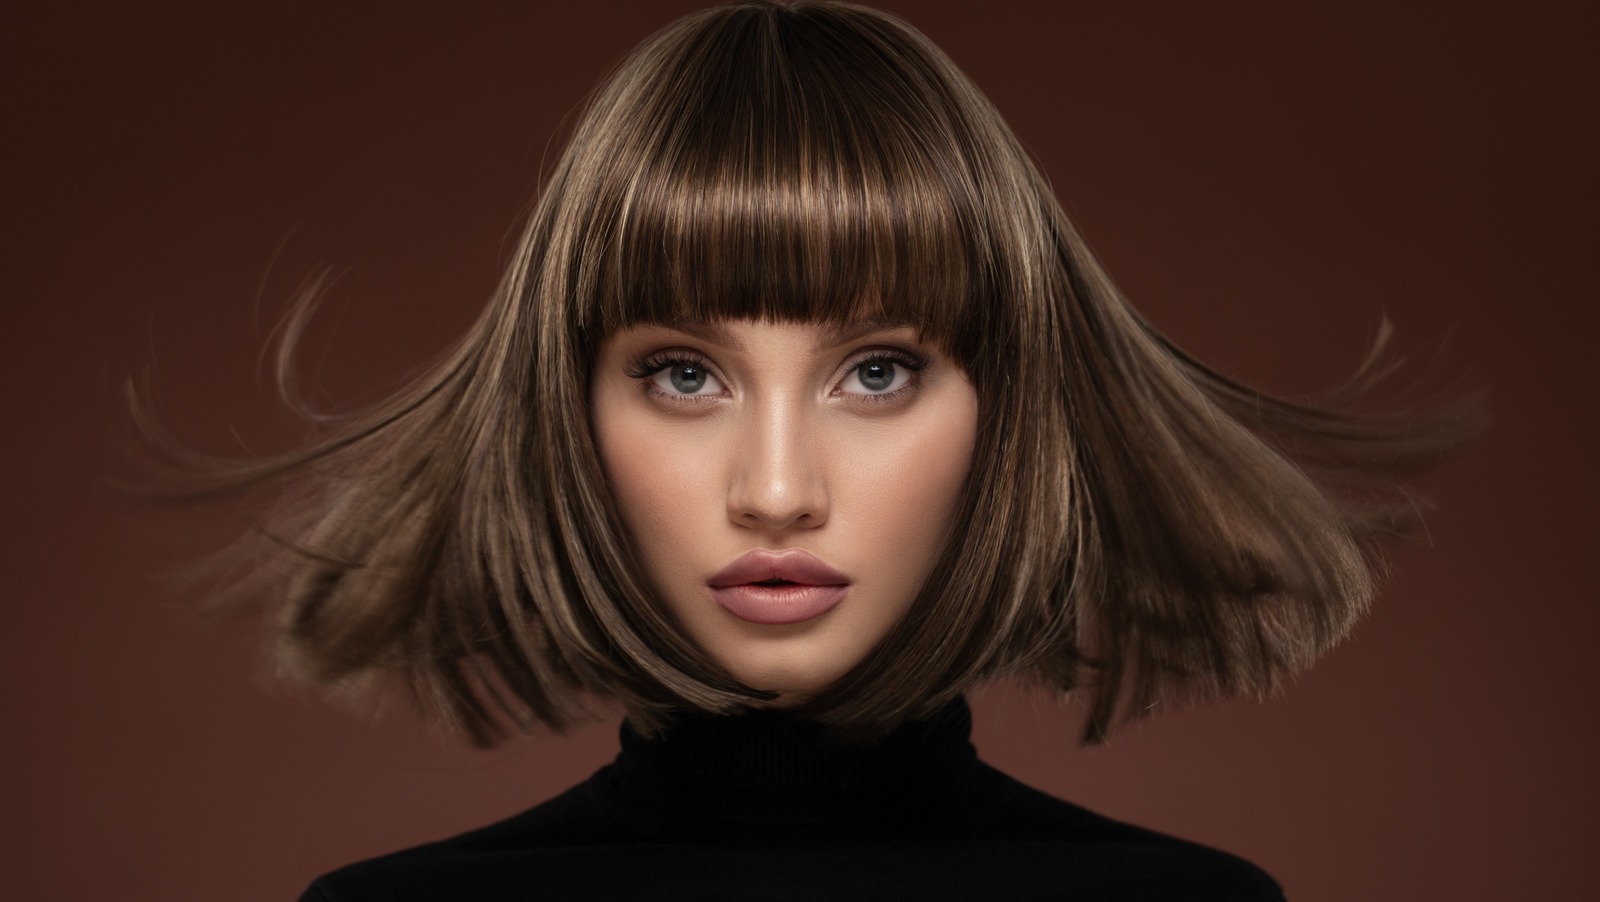 Haircut Trends We're Eyeing For Winter 2023/2024